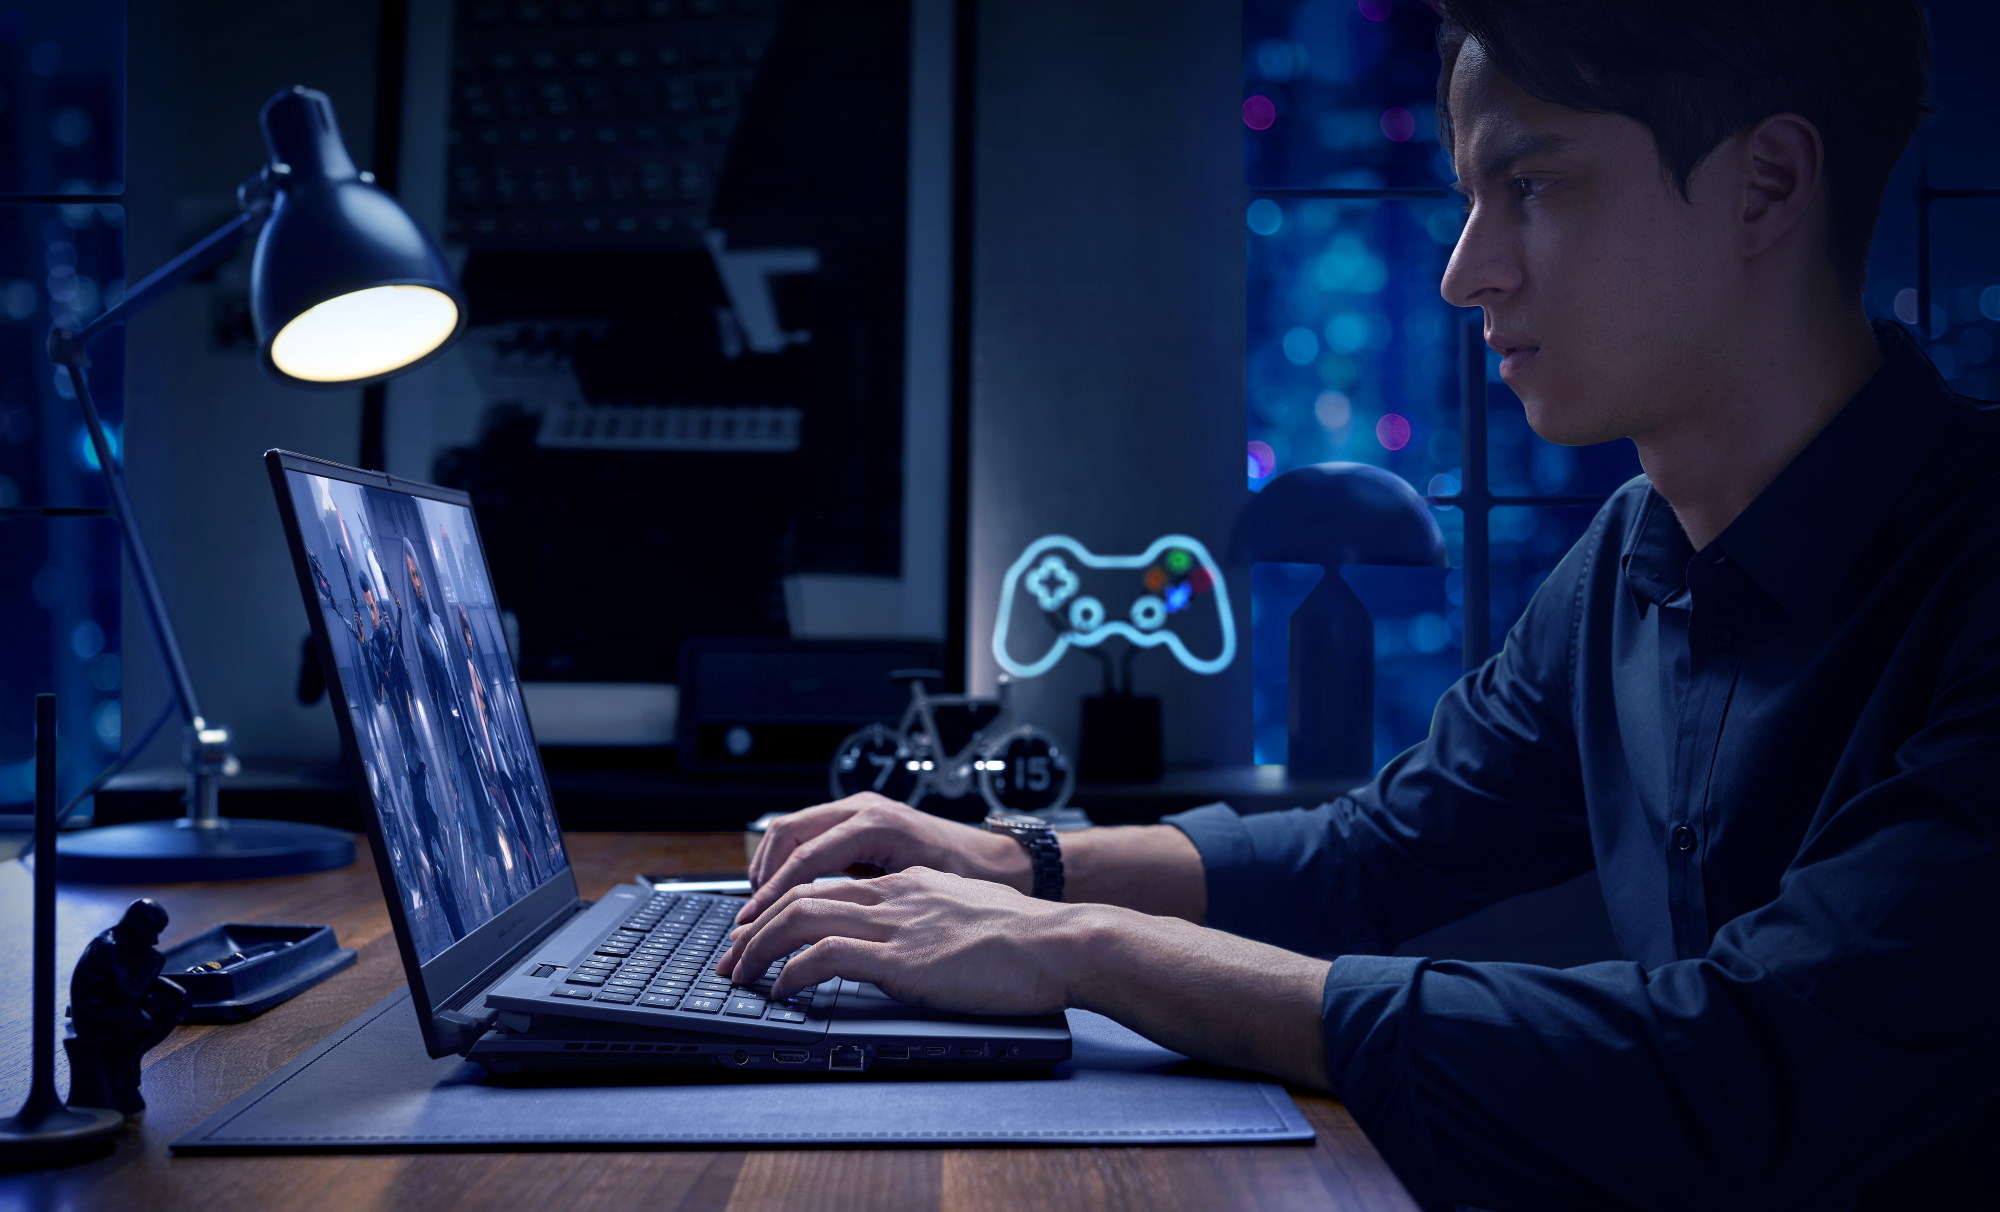 Experience the best of gaming and creating with the premium ROG Zephyrus S17  gaming laptop